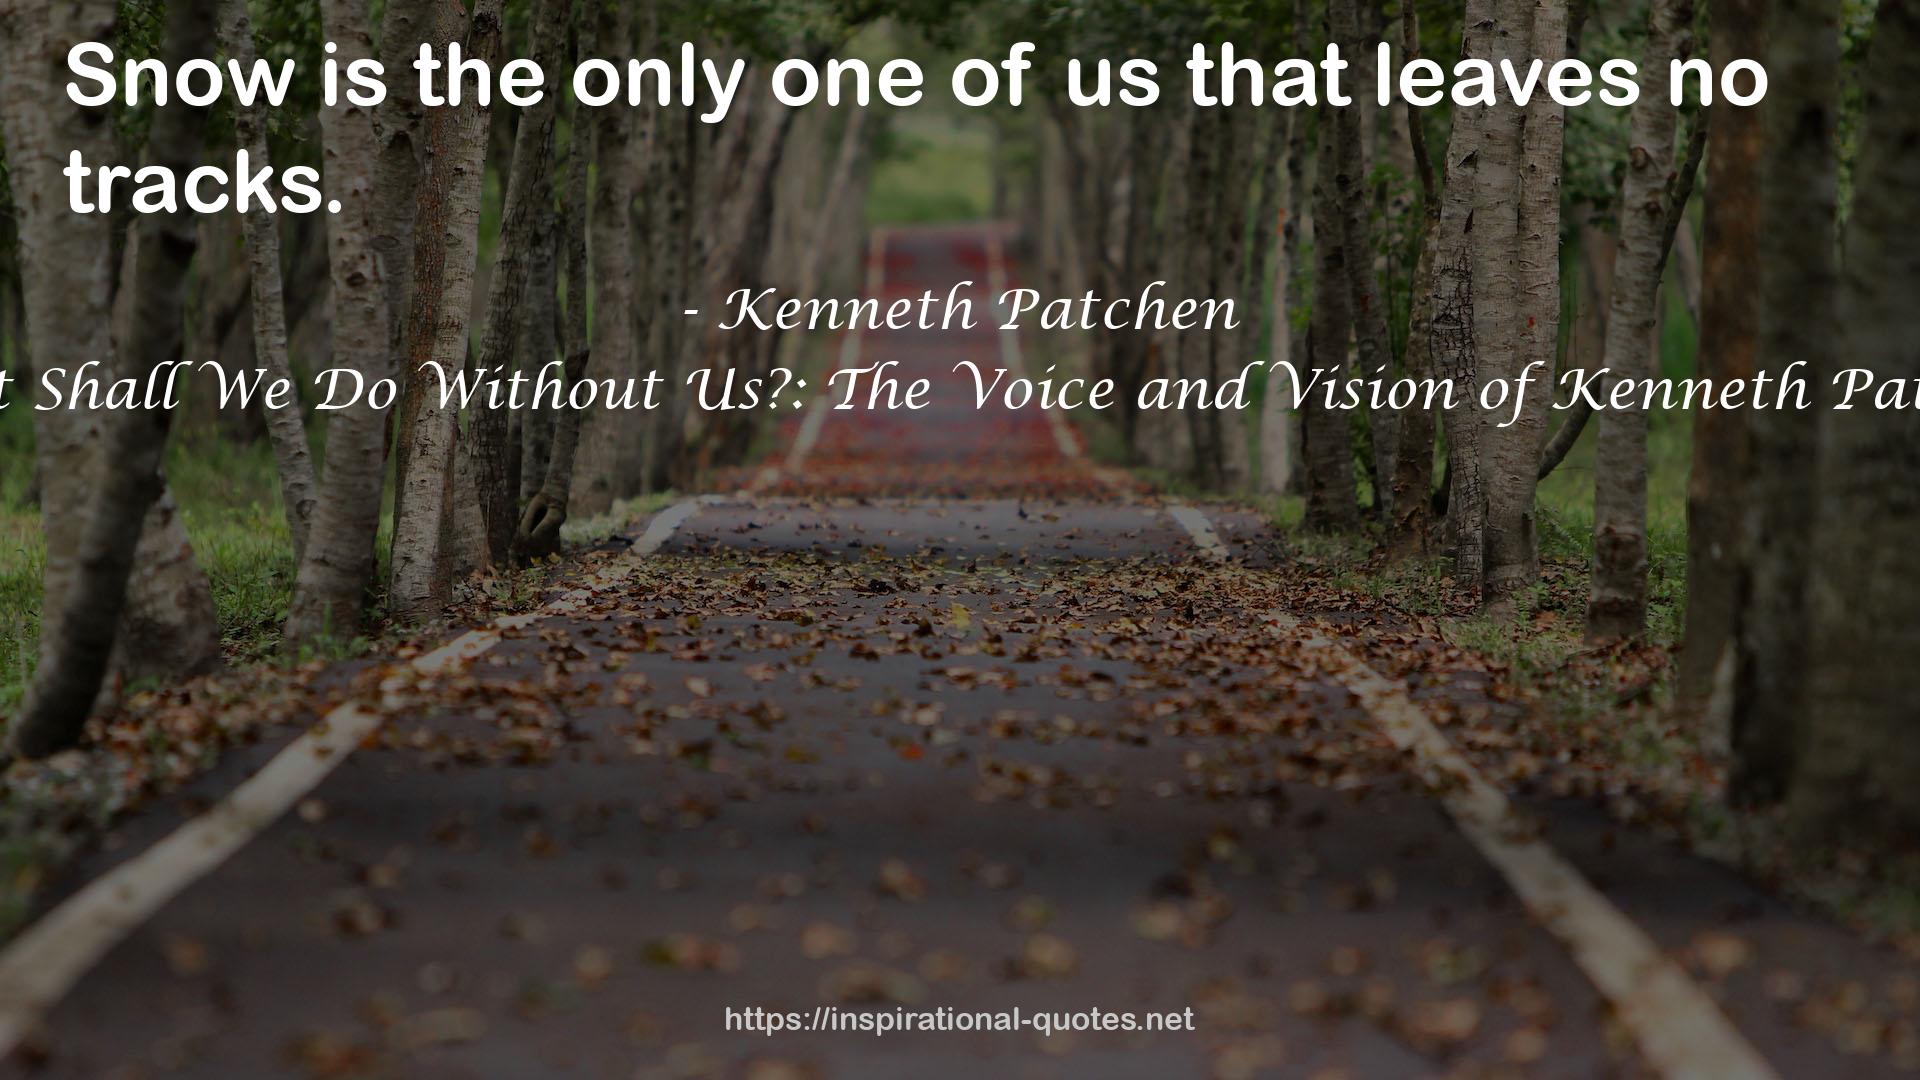 What Shall We Do Without Us?: The Voice and Vision of Kenneth Patchen QUOTES